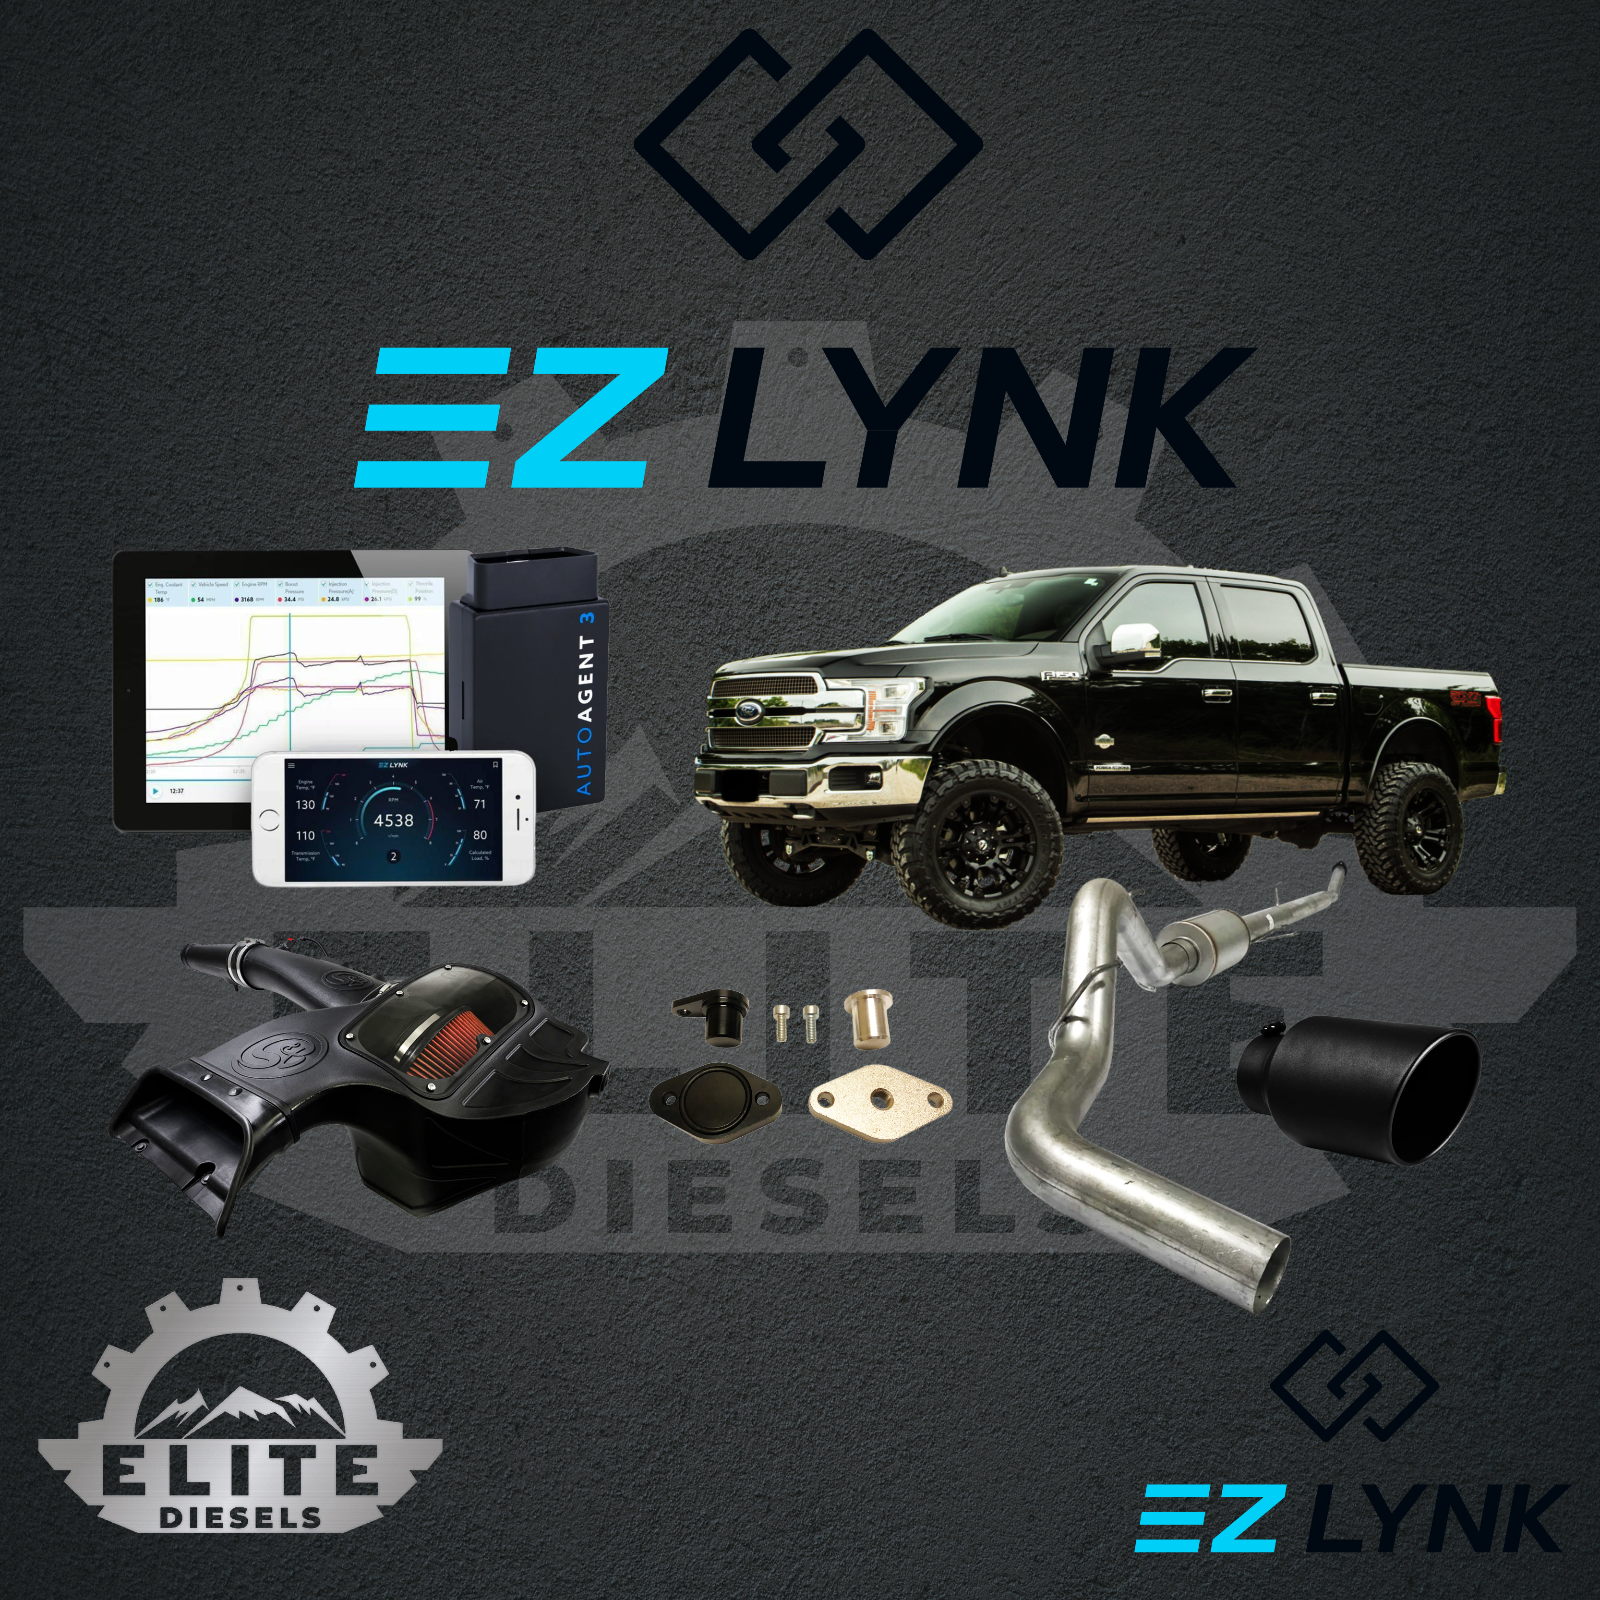 2018 - 2020 3.0L FORD POWERSTROKE EZLYNK AUTOAGENT 3 TUNER ALL-IN-ONE CUSTOMIZABLE KIT.